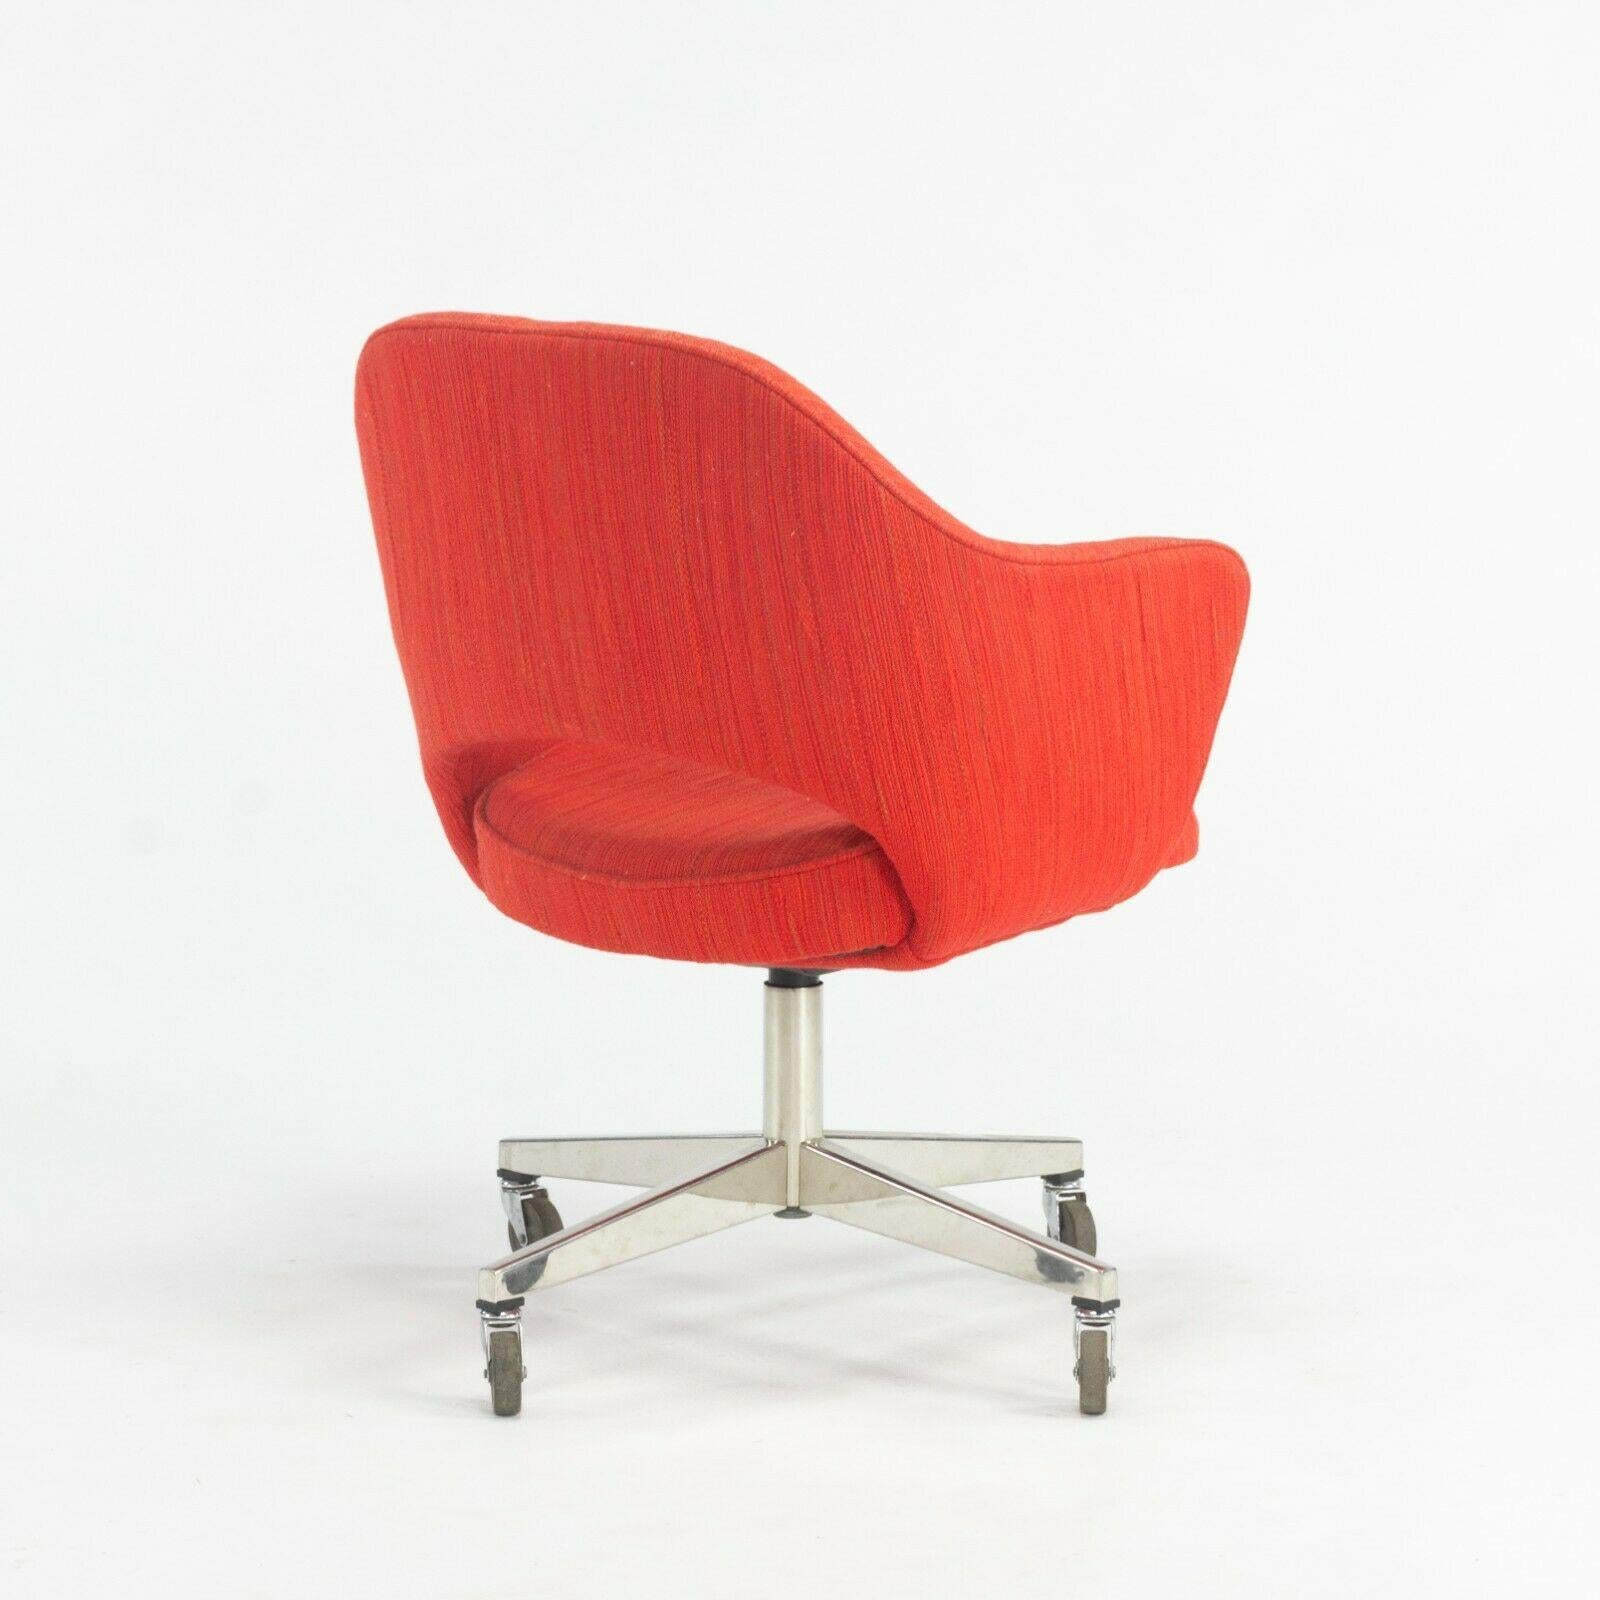 1974 Eero Saarinen for Knoll Rolling Executive Office Chairs Original Red Fabric In Good Condition For Sale In Philadelphia, PA